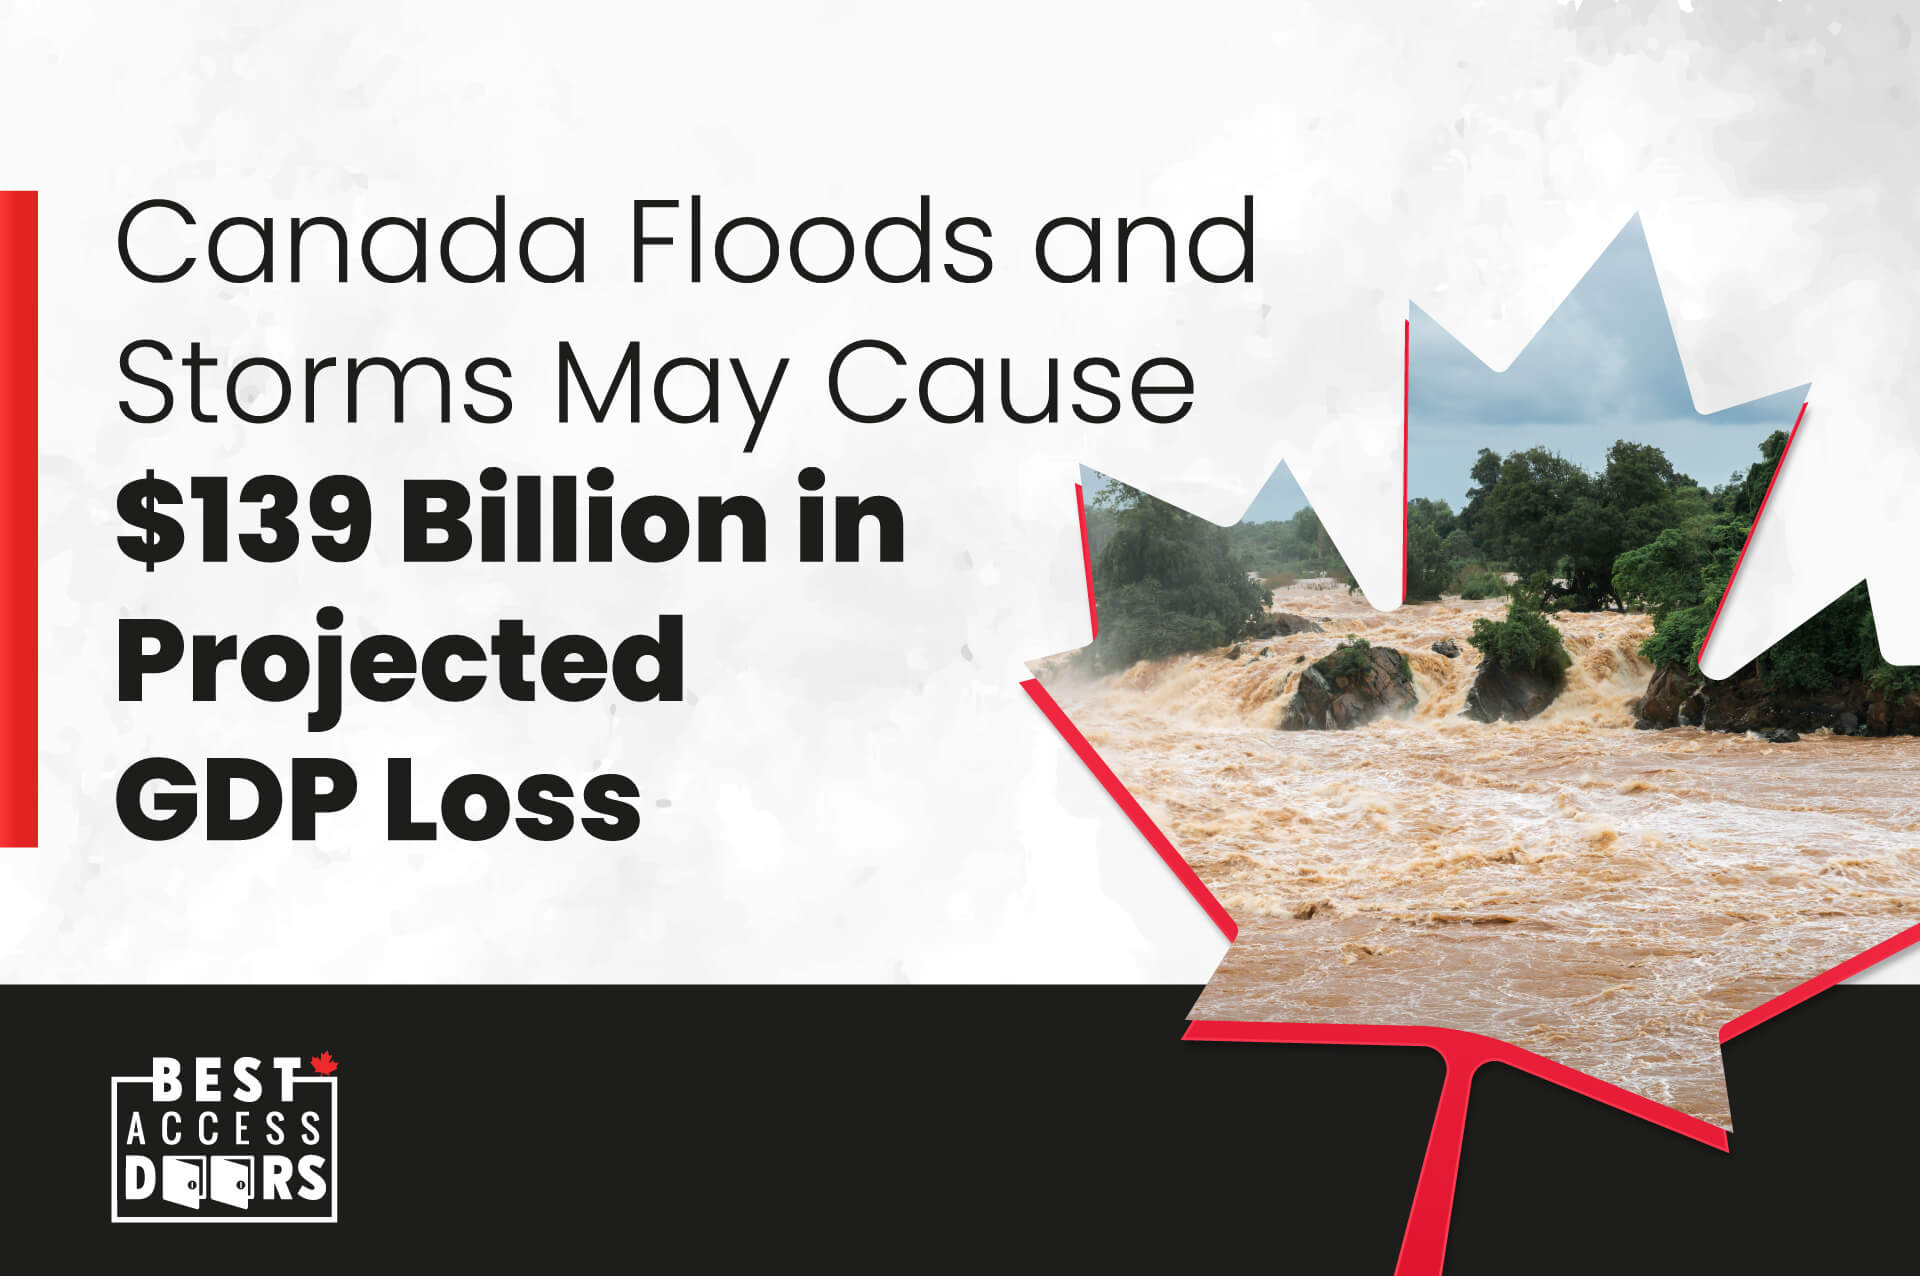 Canada Floods and Storms May Cause $139 Billion in Projected GDP Loss